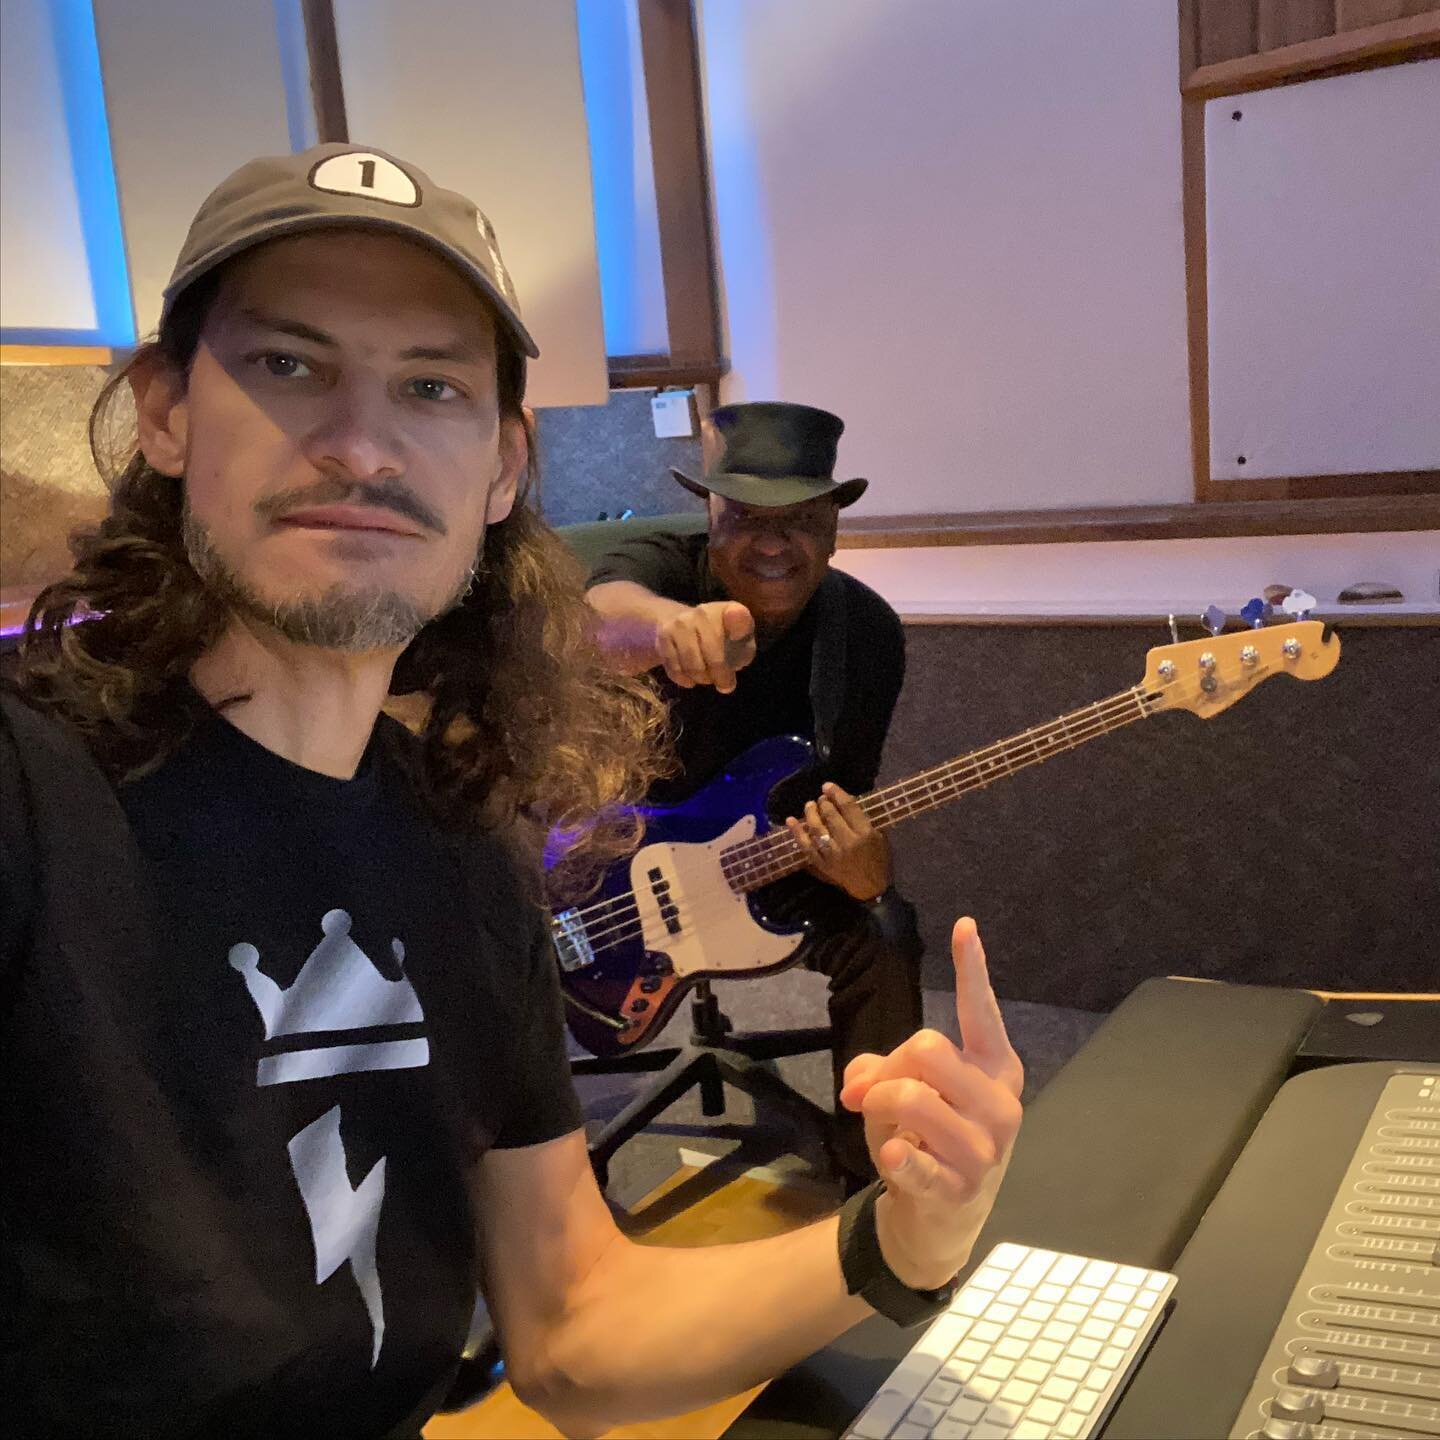 Back in the studio with @theneverlutionaries recording bass ,guitars and vocals 
: 
:
:
:
:
:
:
:#singer #newmusic #musicproducer #musicproduction #artist #recordingartist #rock #songwriter #band #vocals #guitar #bass  #musicians